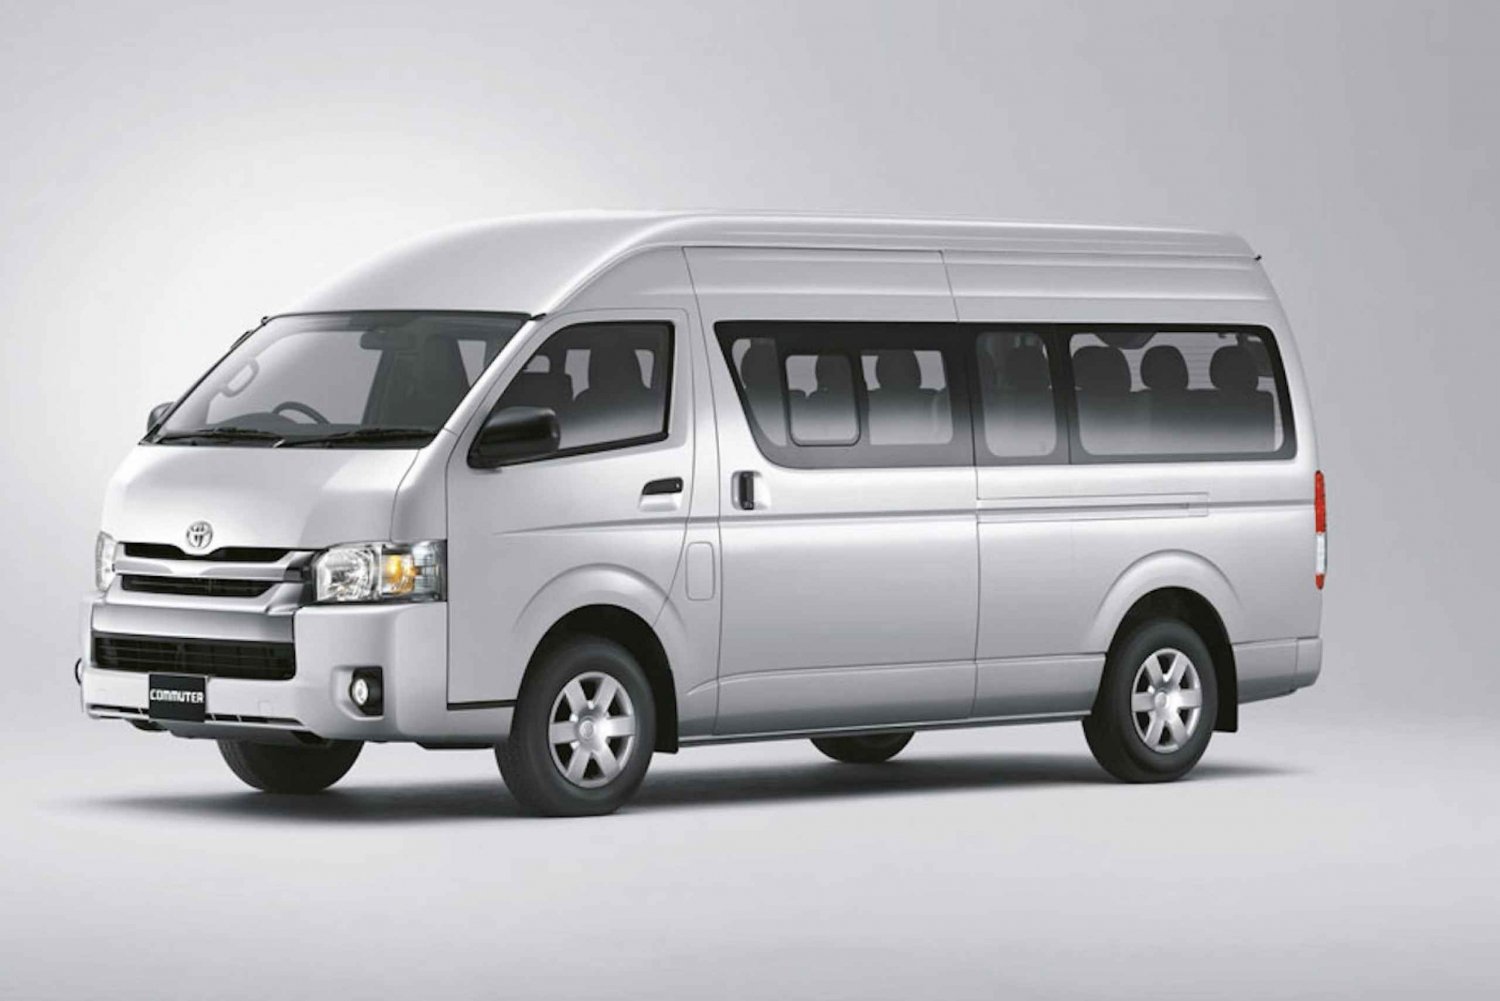 Puerto Princesa: Shared Airport Transfers to/from hotel